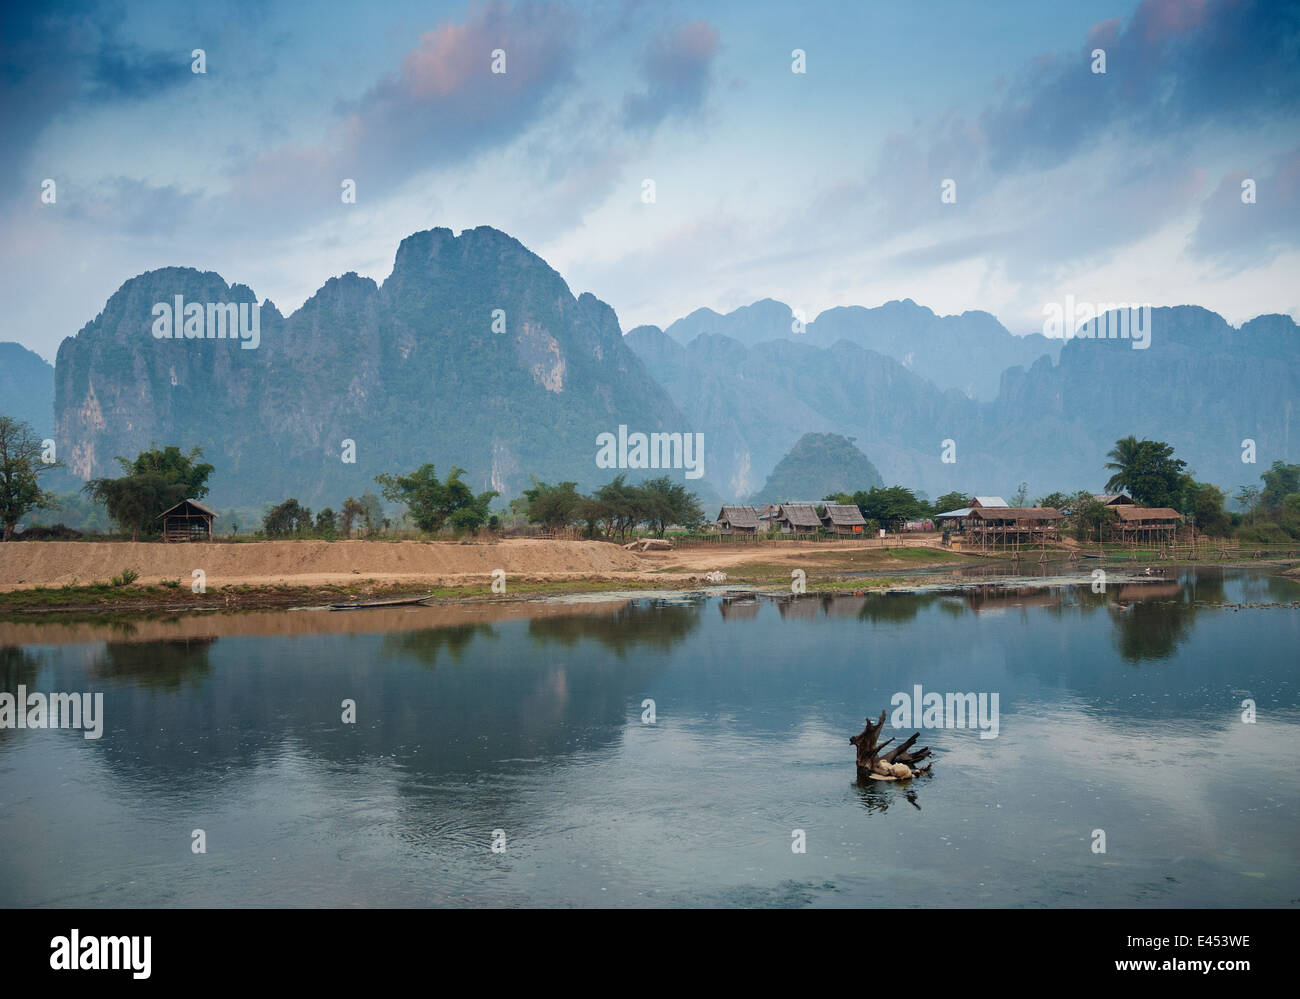 karst landscape and river in vang vieng laos Stock Photo